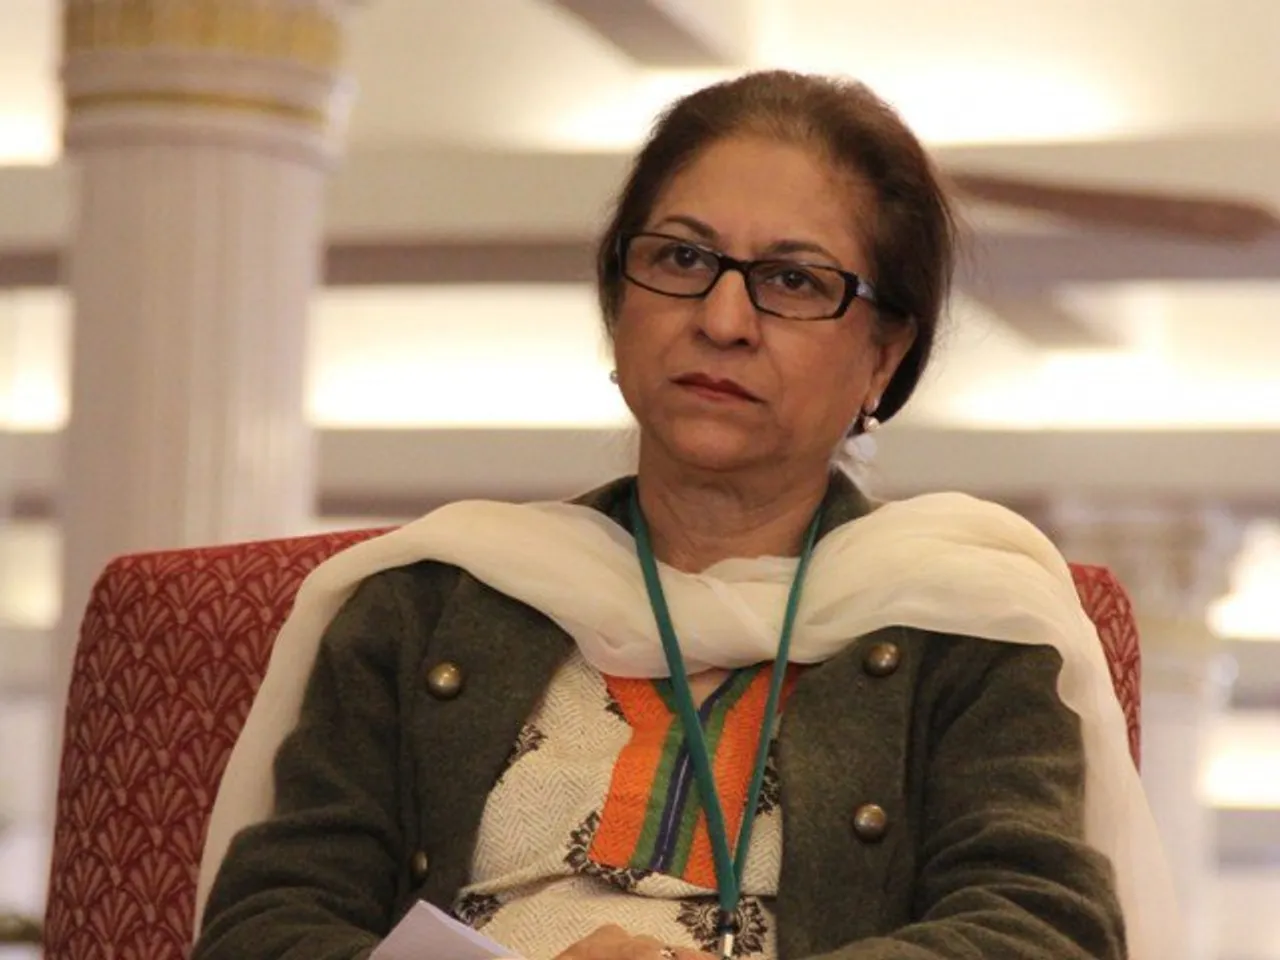 Human Rights Lawyer Asma Jahangir: Why She Inspired India And Pakistan